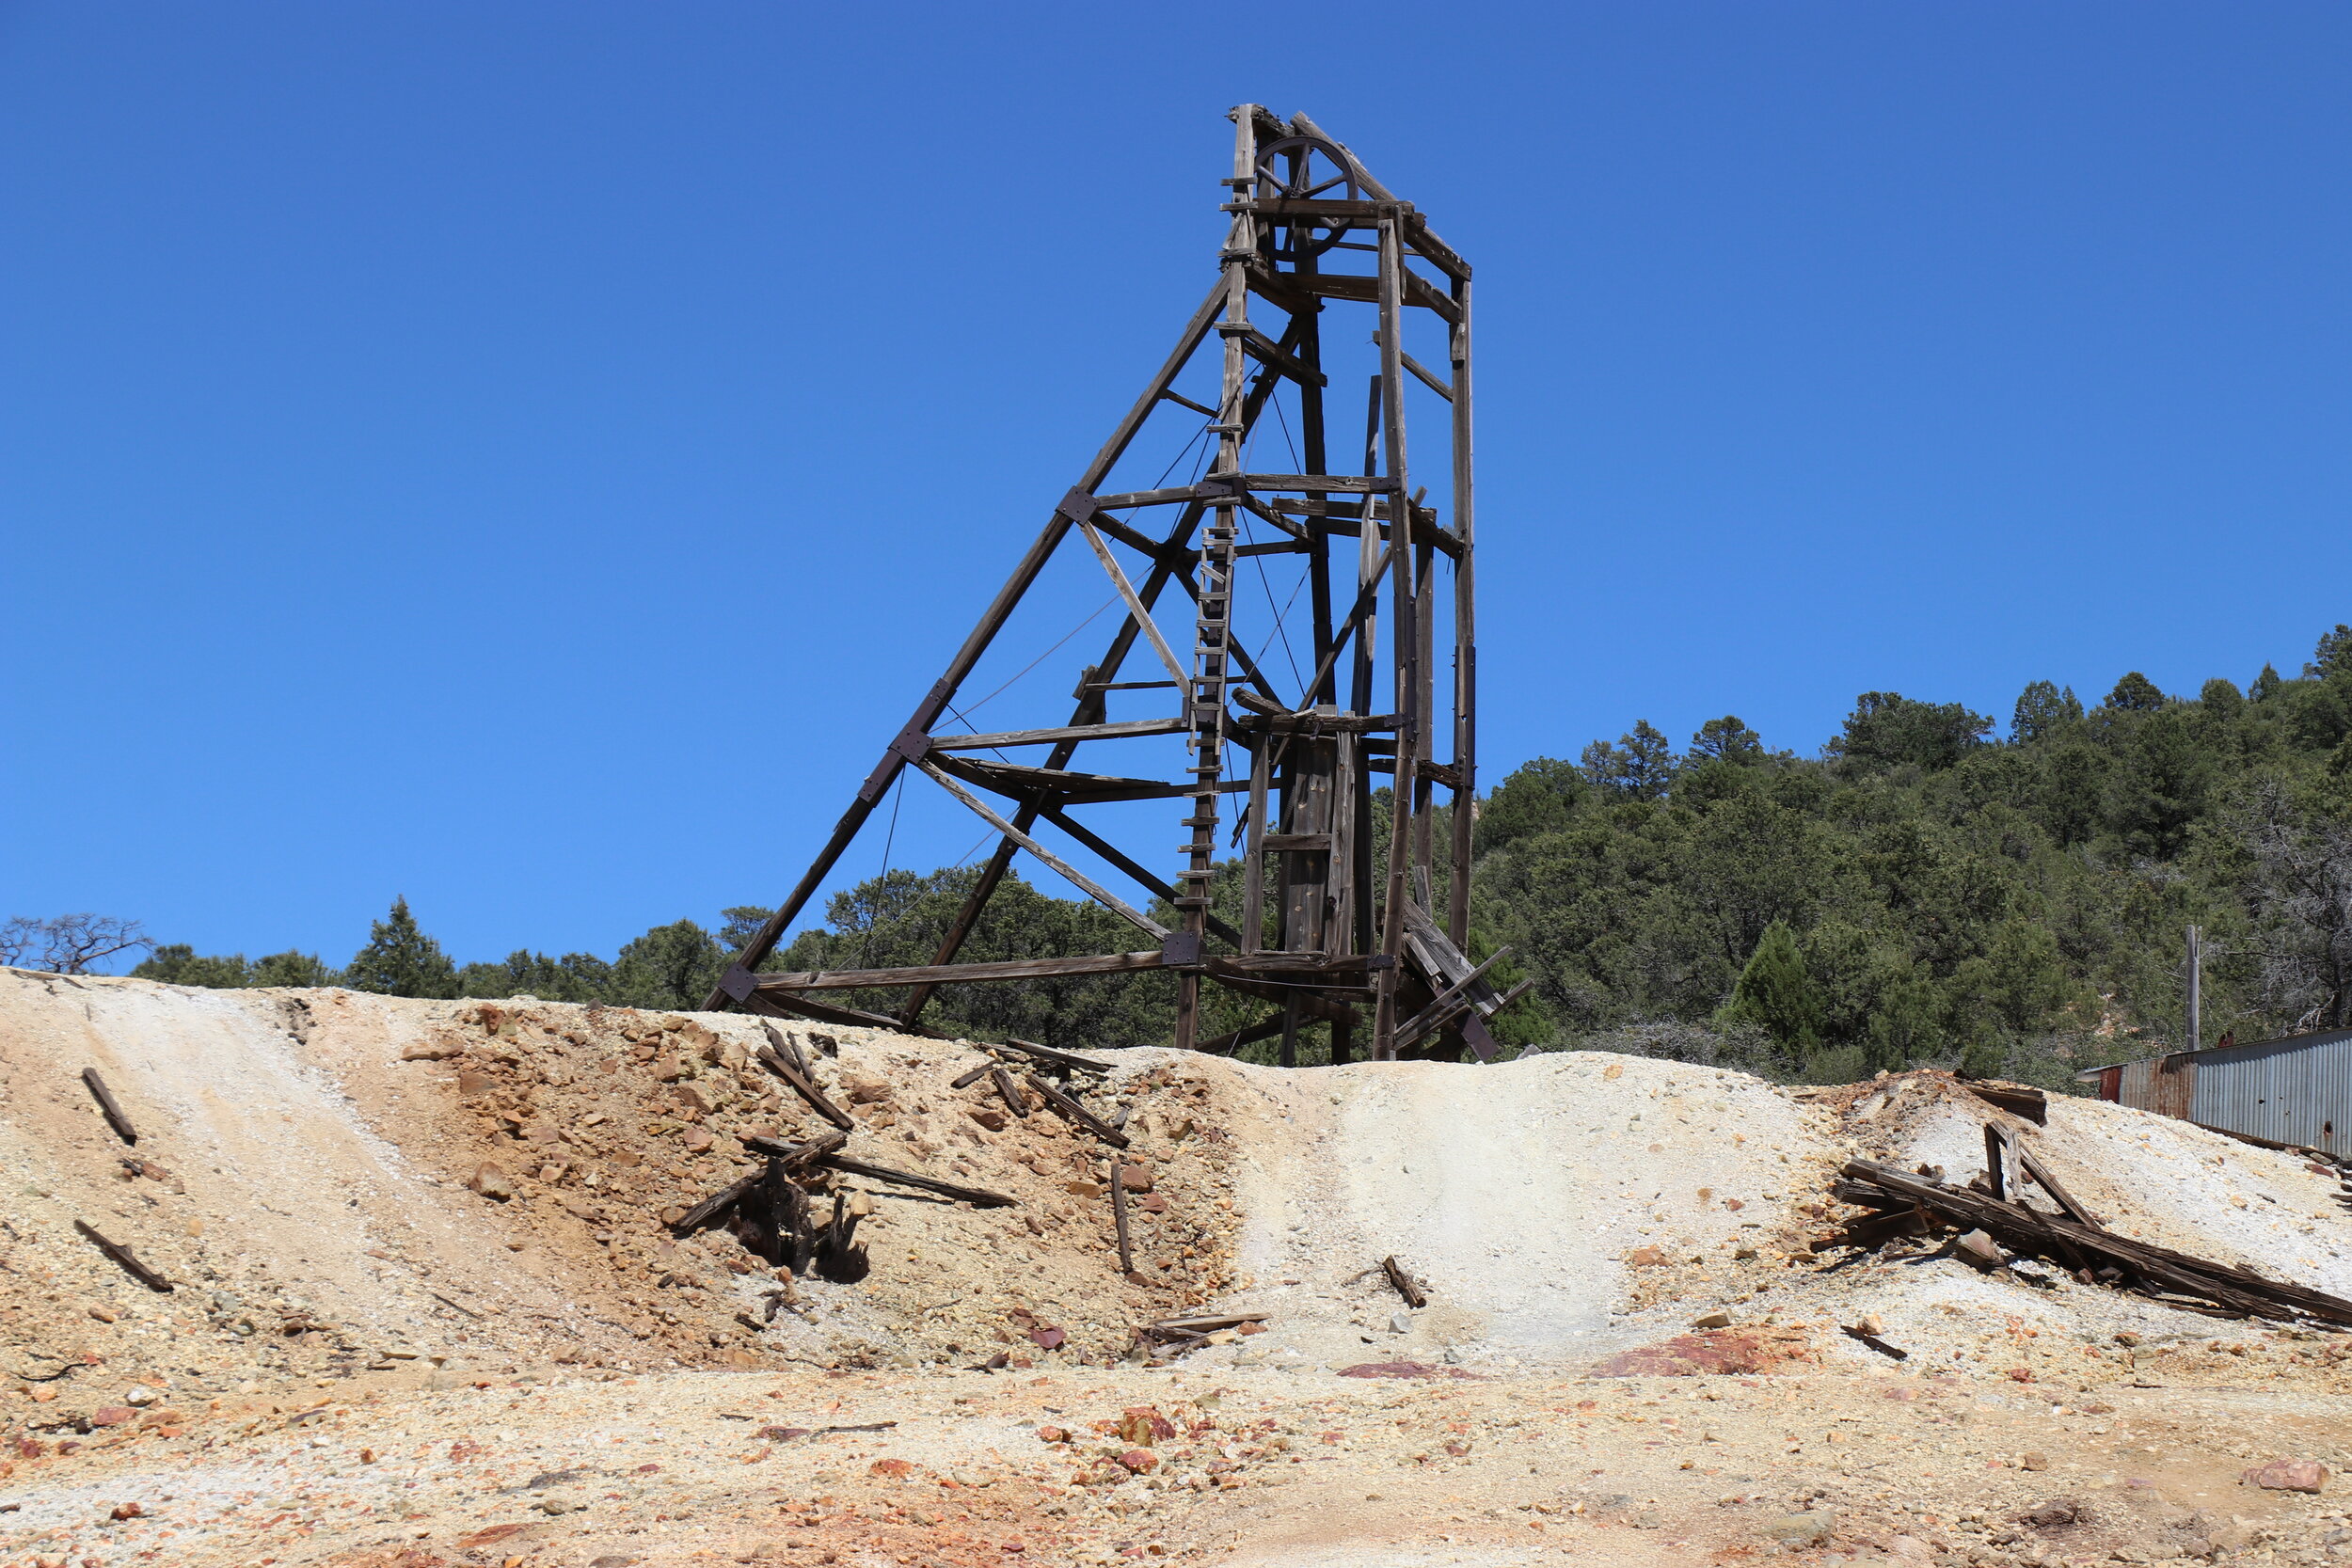 The headframe sits atop the tailings pile.